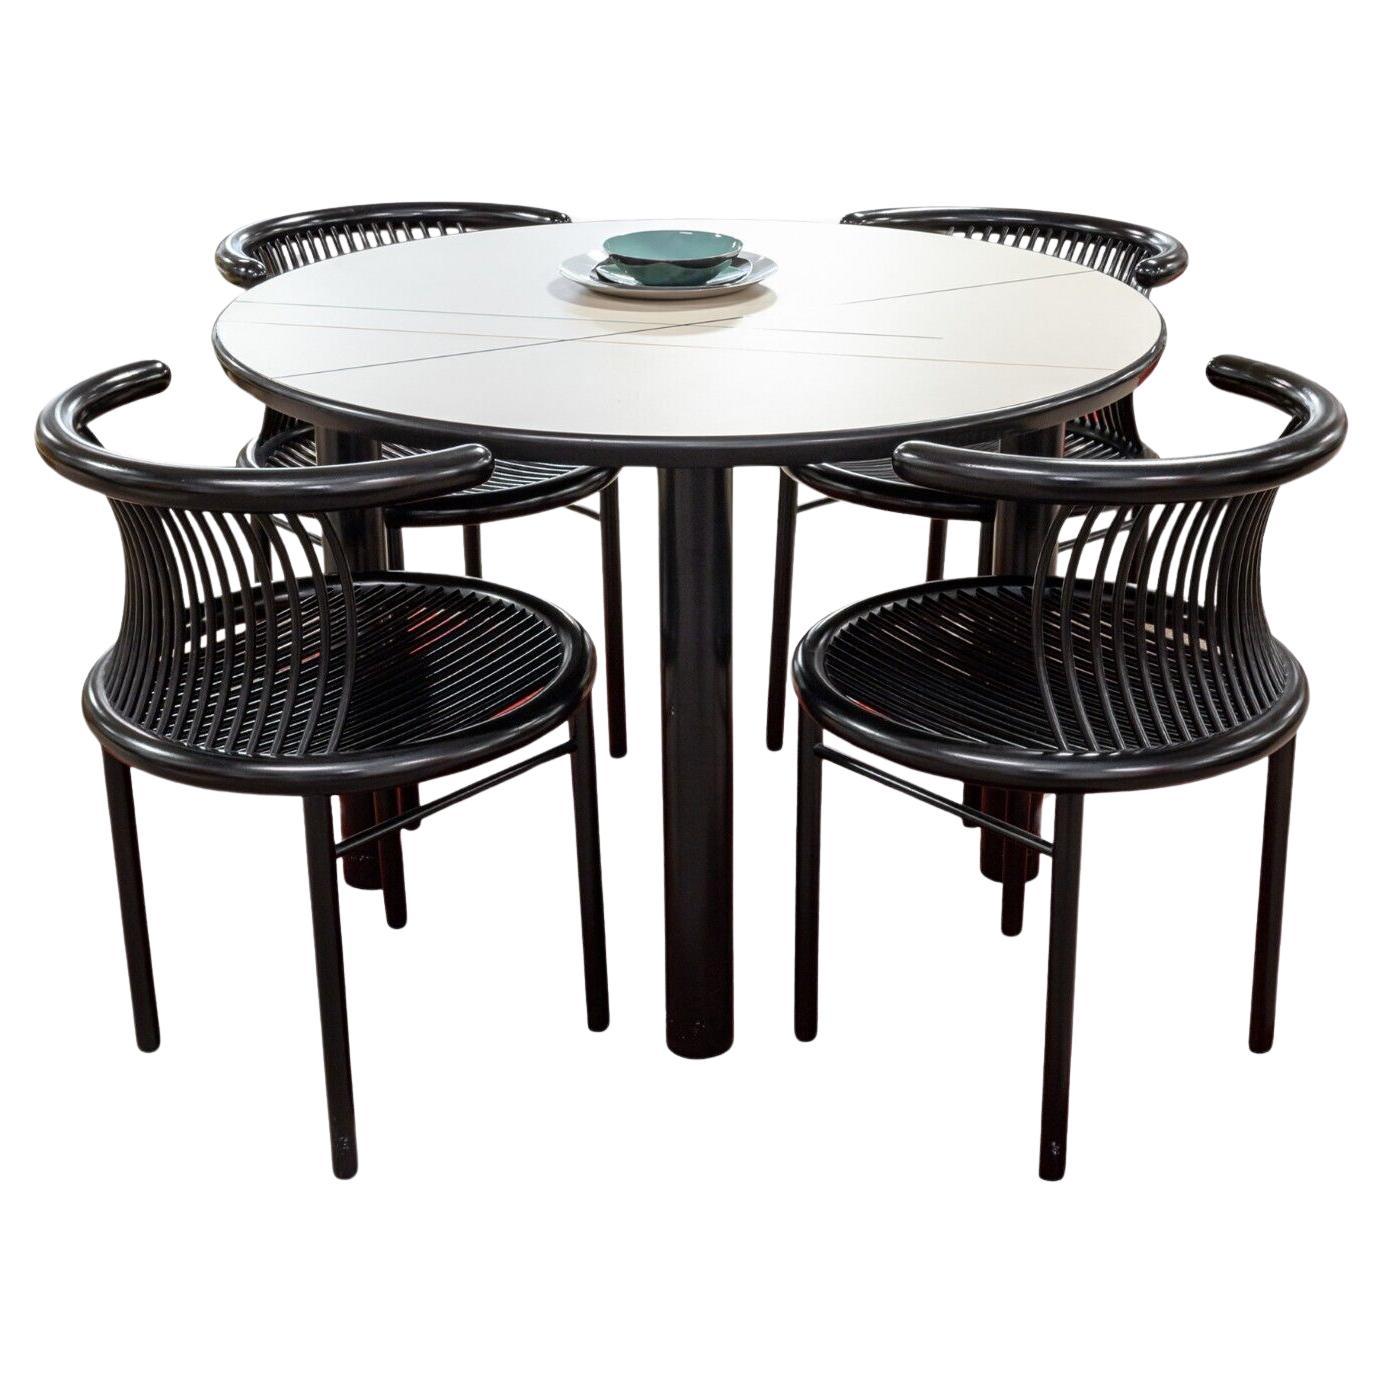 Set of 4 Lubke Herbert Ohl Circo Chairs and Peterson Design Table Dinette Set For Sale